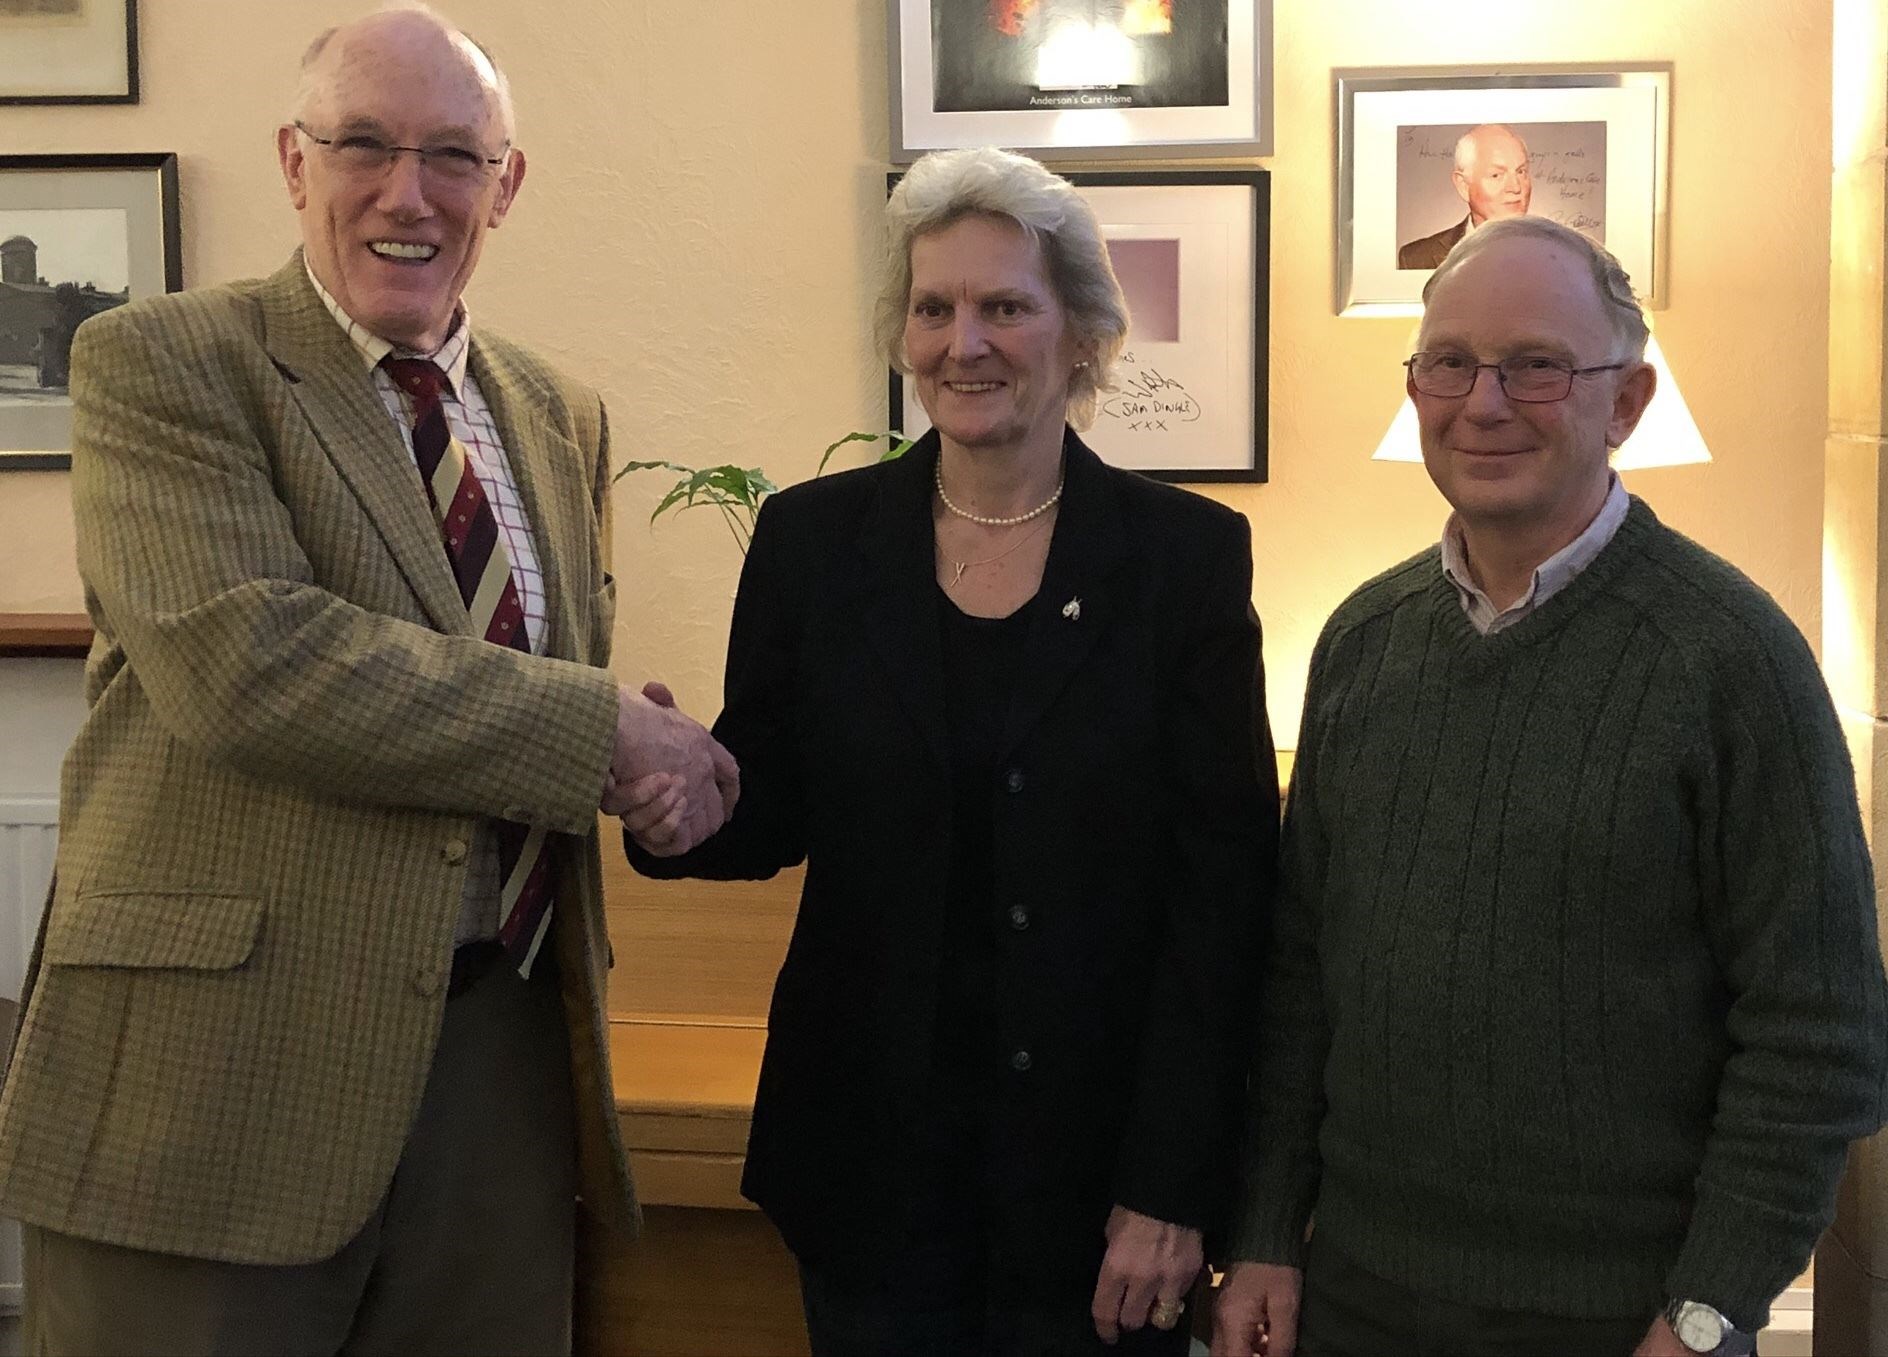 Outgoing chairman of Anderson's Care Home David Evans (left) hands over the post to Issie Graham, with Iain Jamieson as vice-chairman.